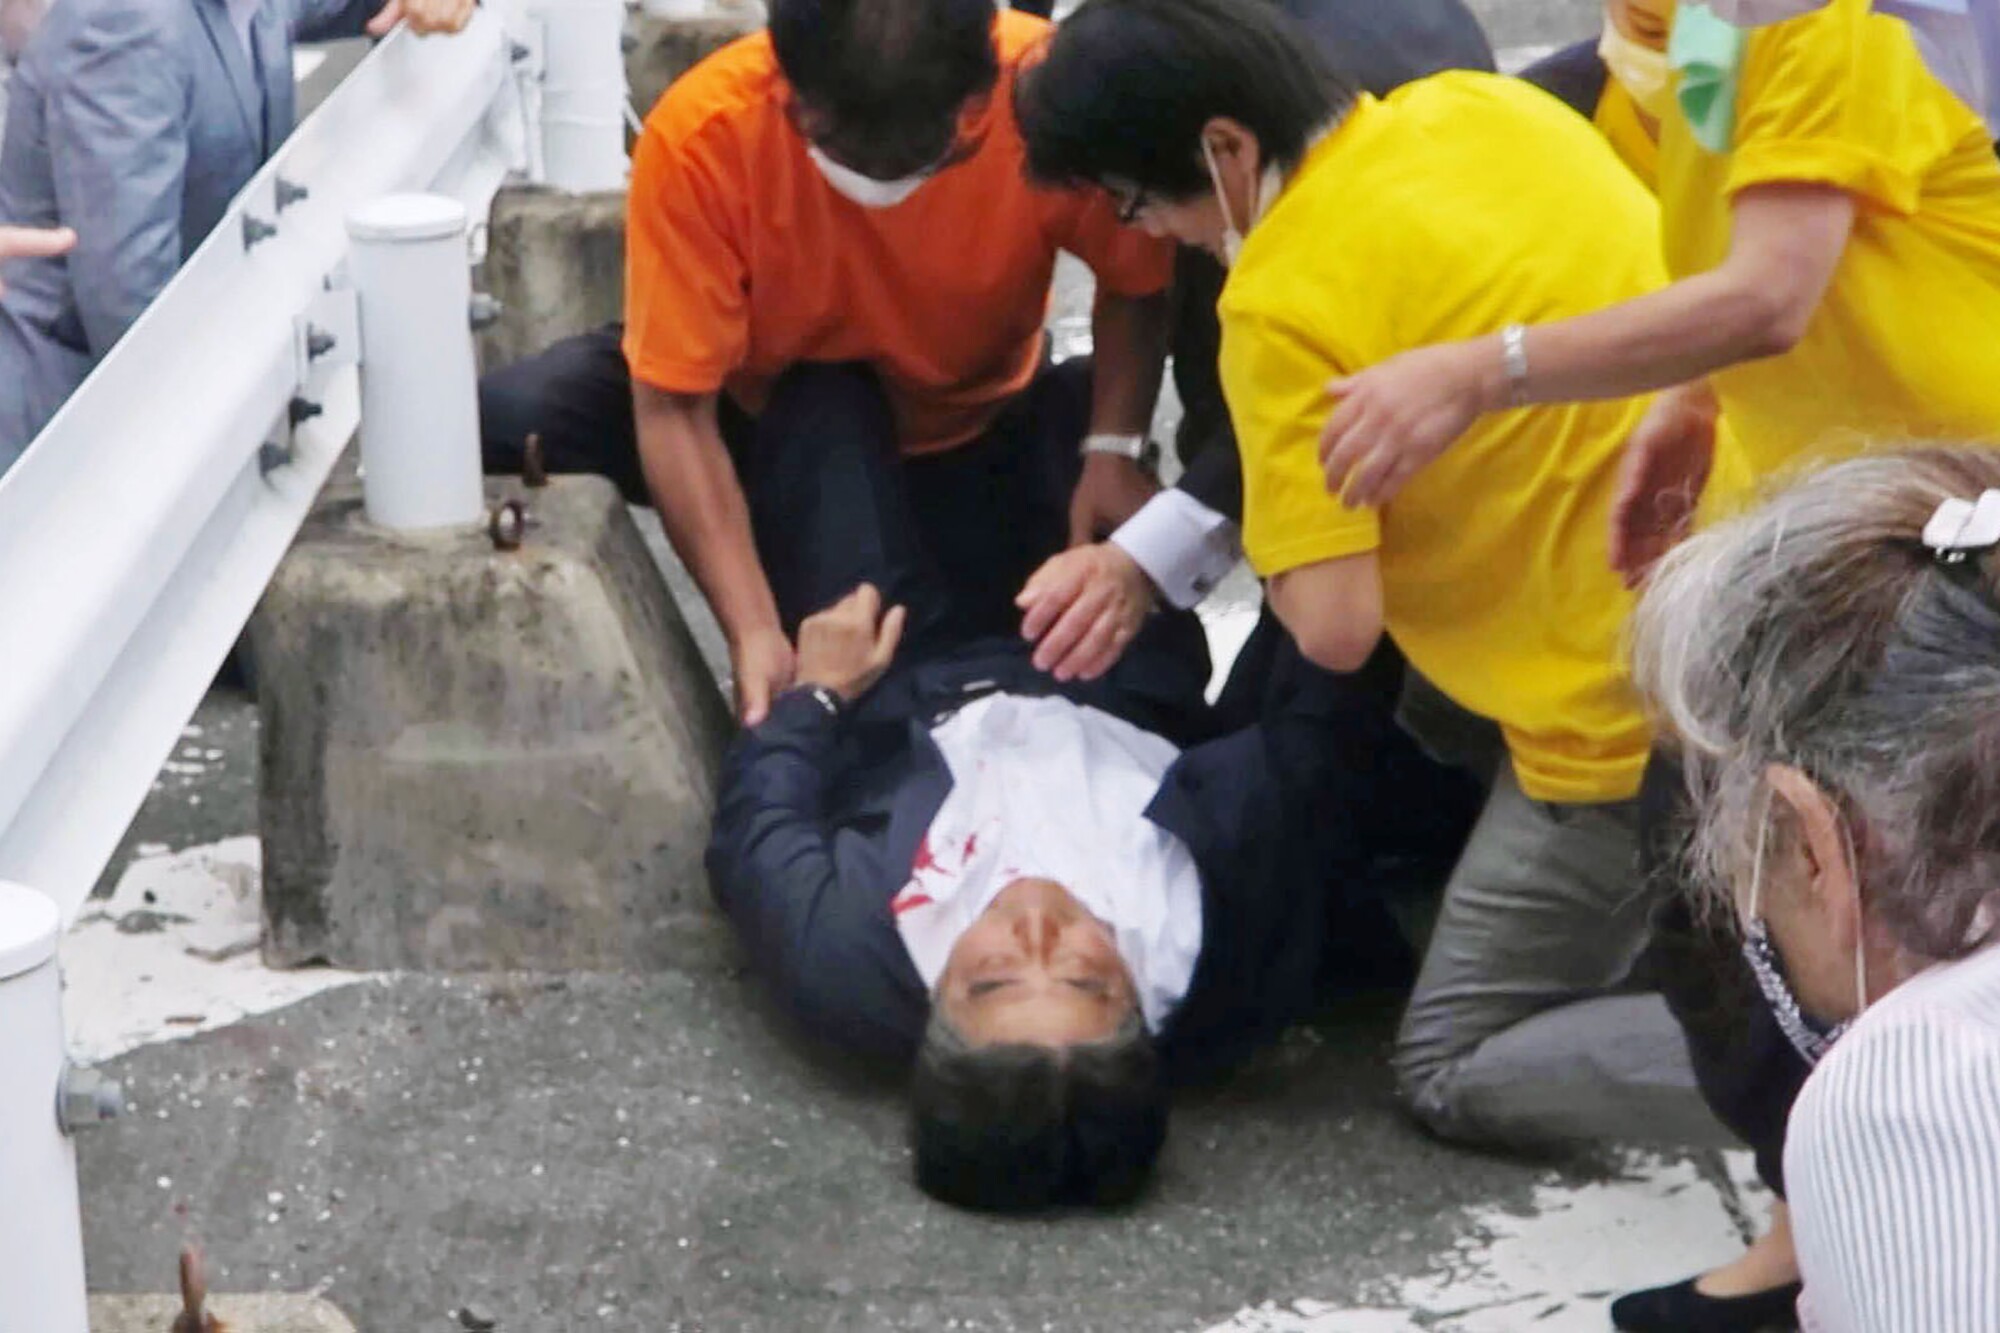 Japan’s former Prime Minister Shinzo Abe is attended on the ground after being shot Friday